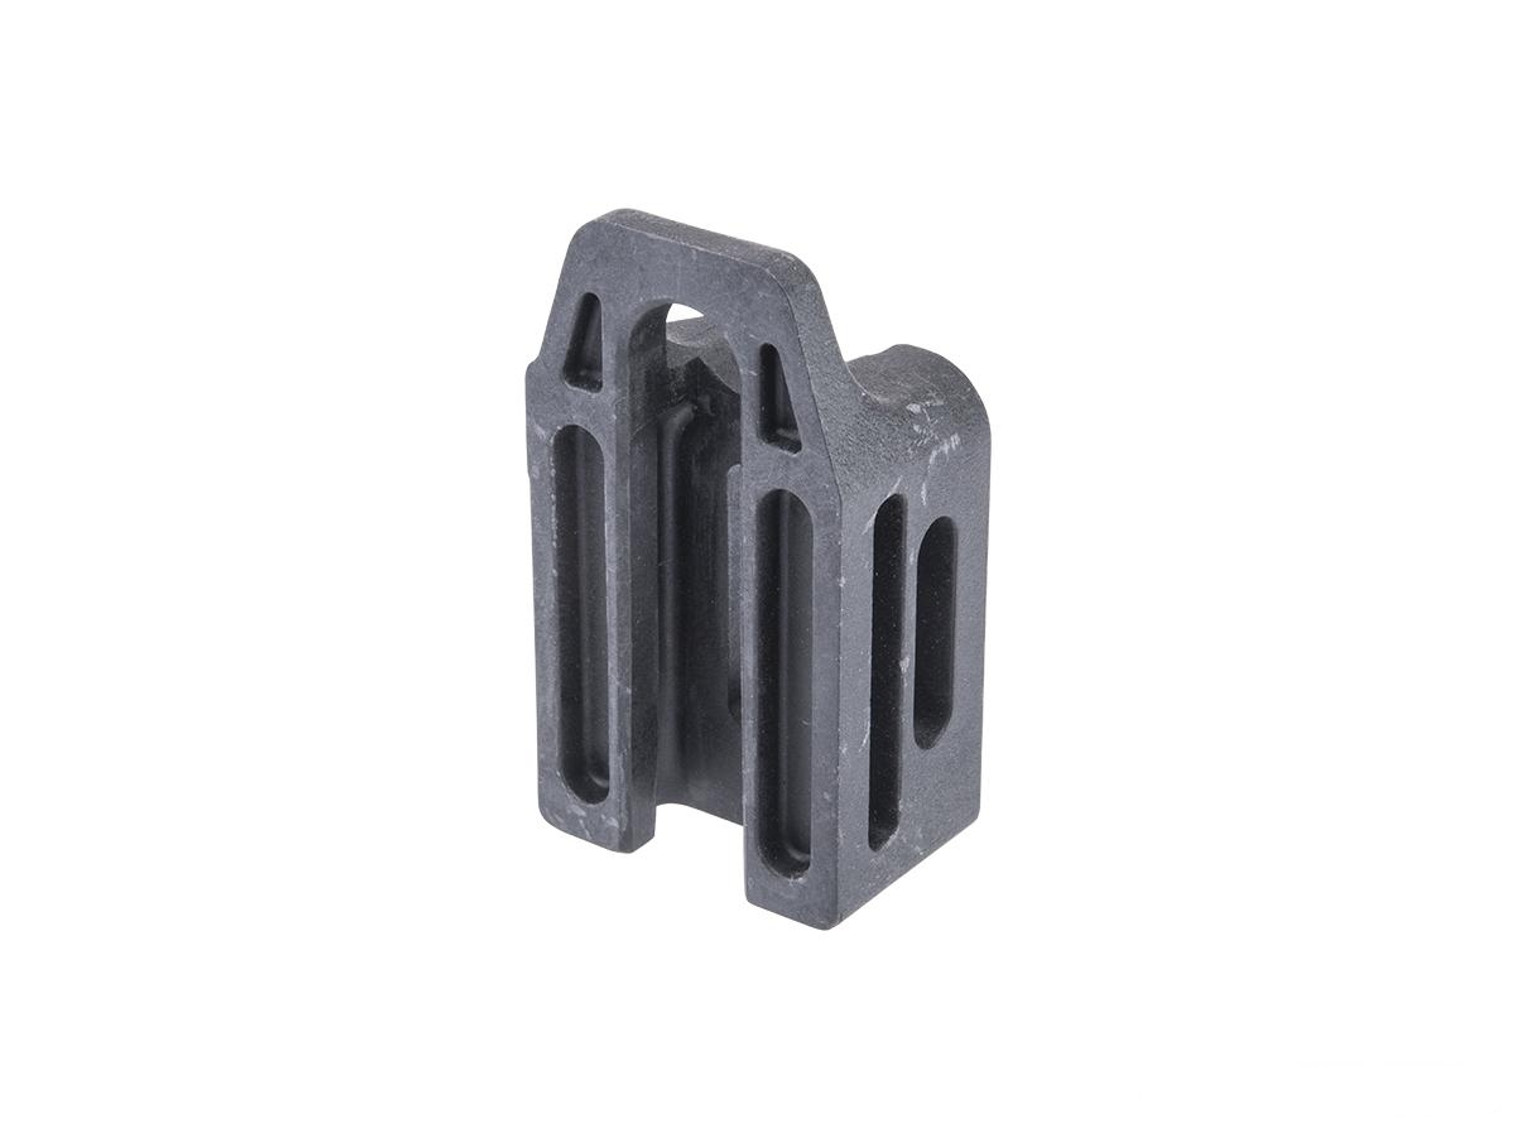 ASG Replacement Receiver Stock Hinge for ASG CZ 805 BREN Airsoft AEG